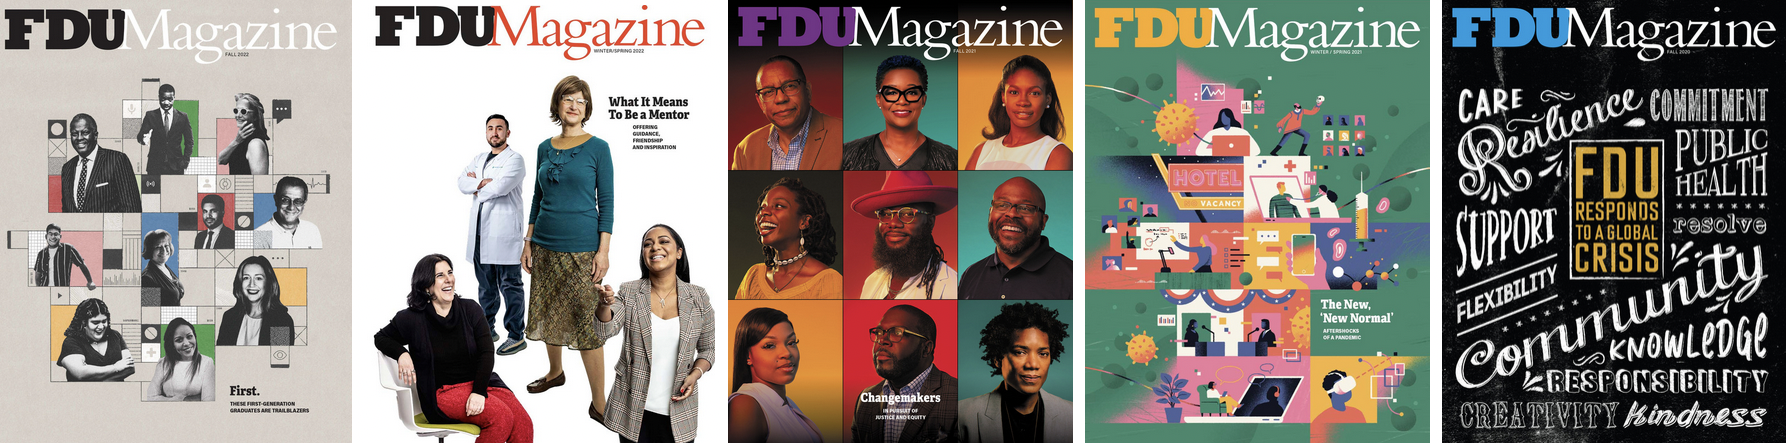 The five most recent covers of FDU Magazine.